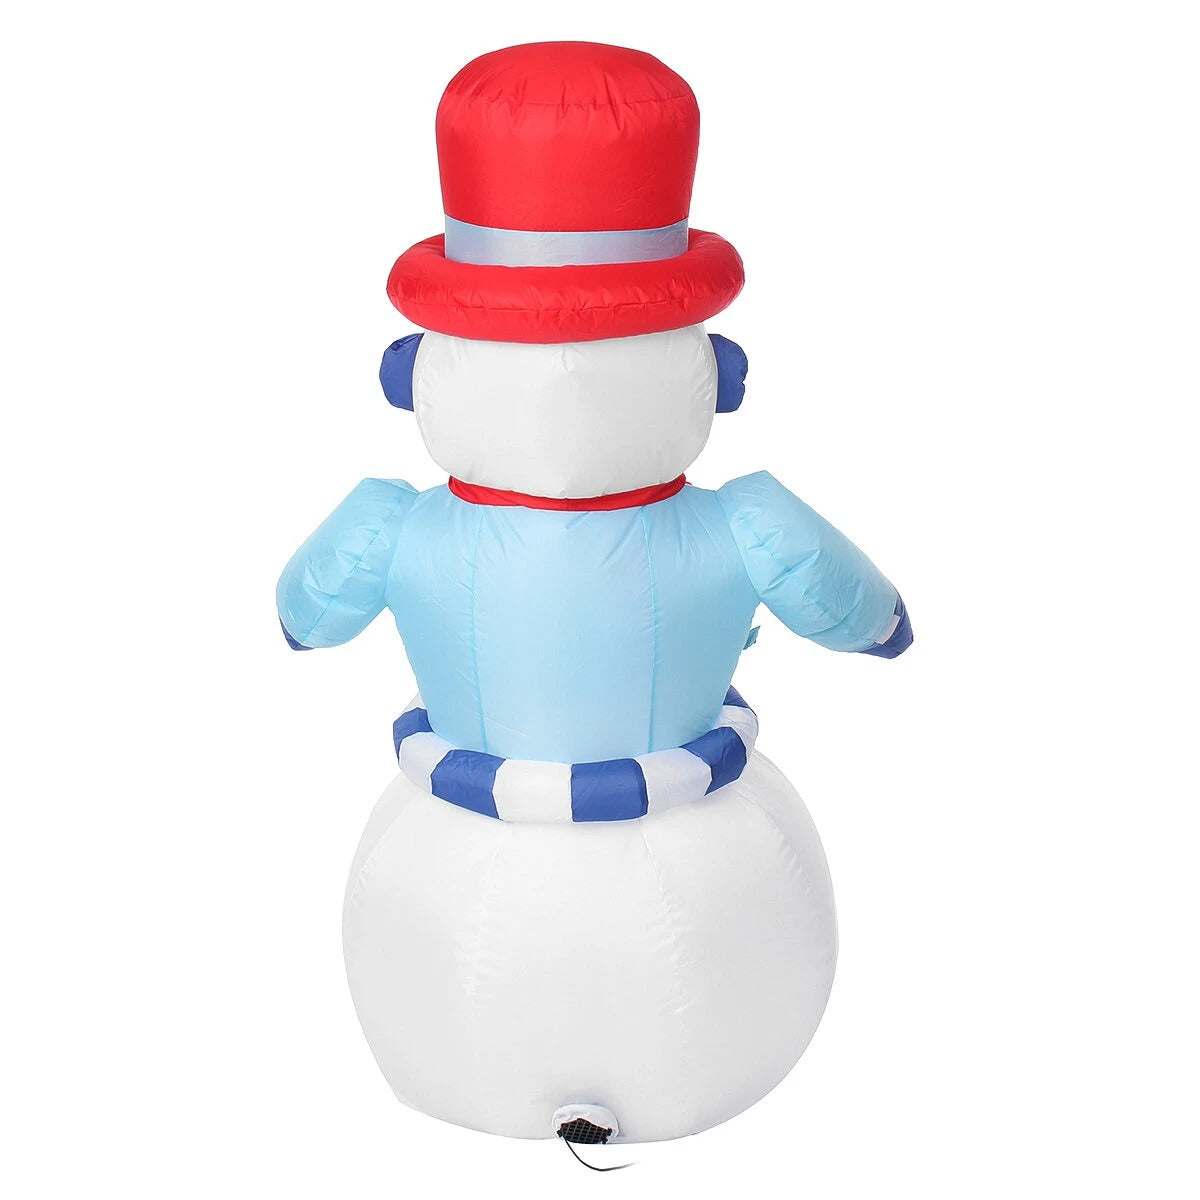 New LED Inflatable Snowman Model For Christmas